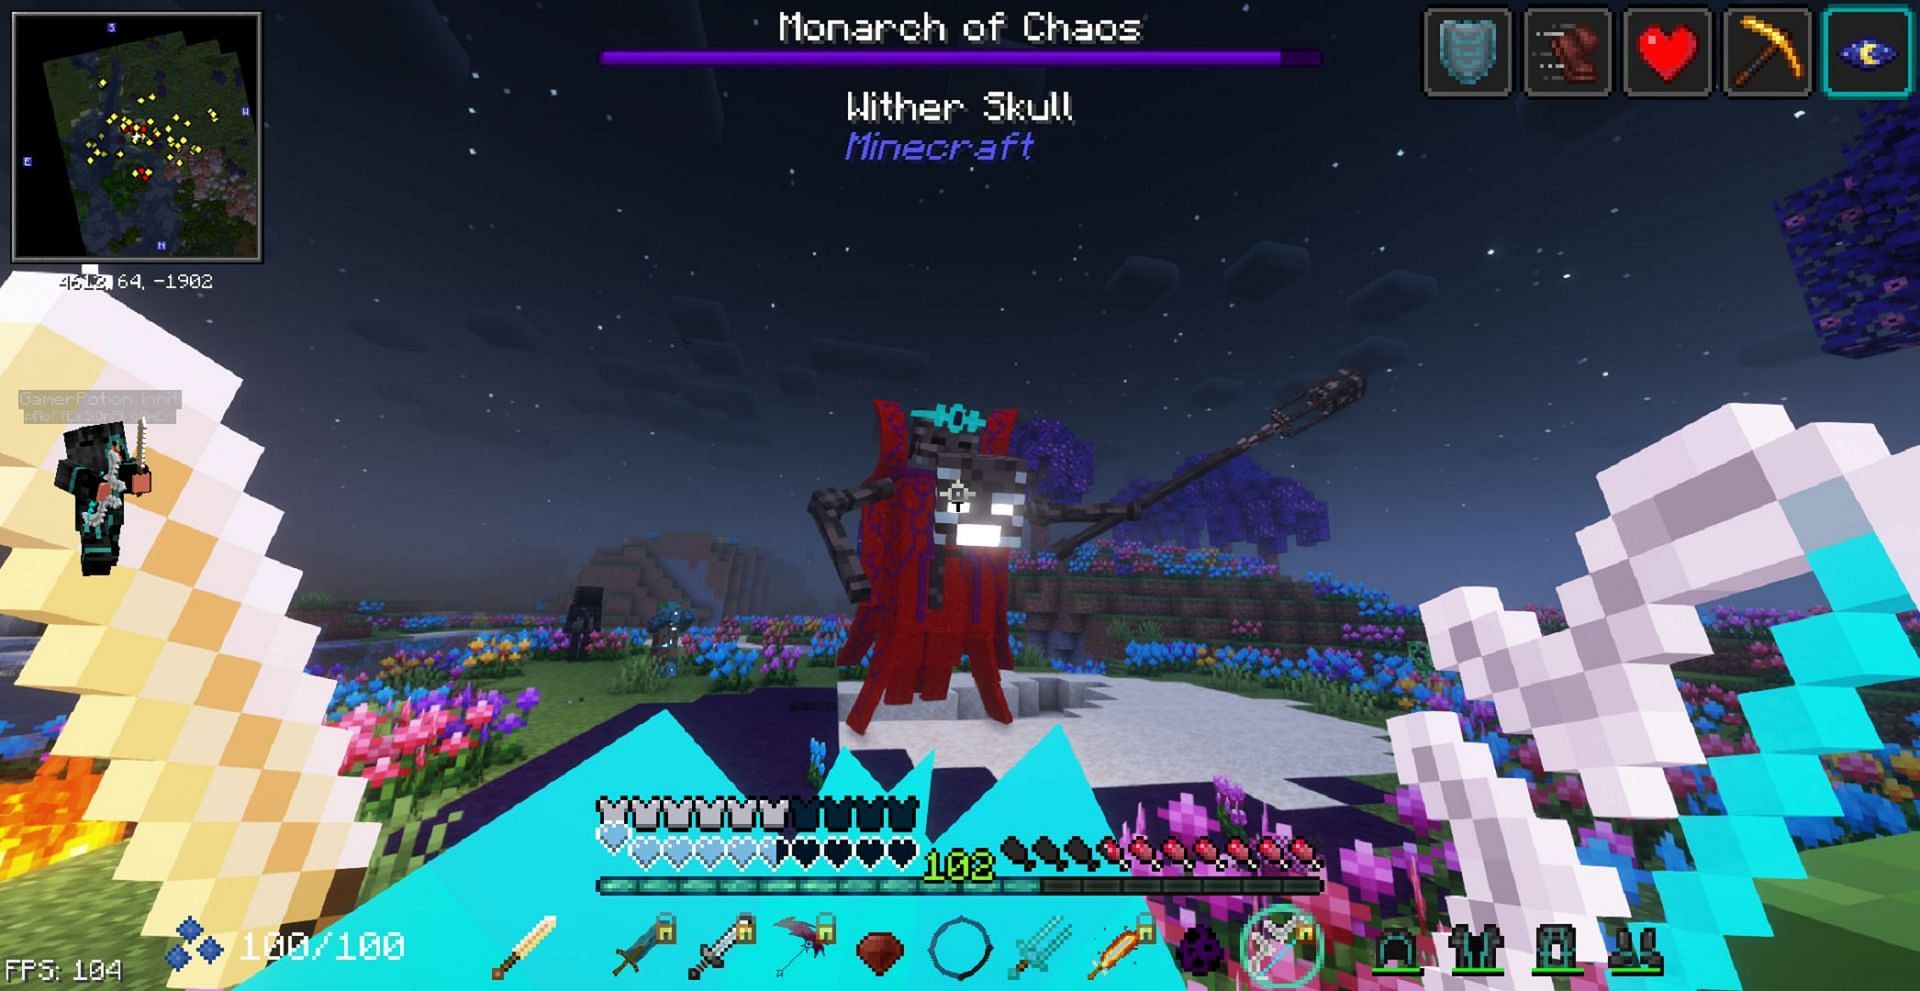 A Minecraft player faces the Monarch of Chaos in the Dark RPG modpack (Image via GamerPotion/CurseForge)